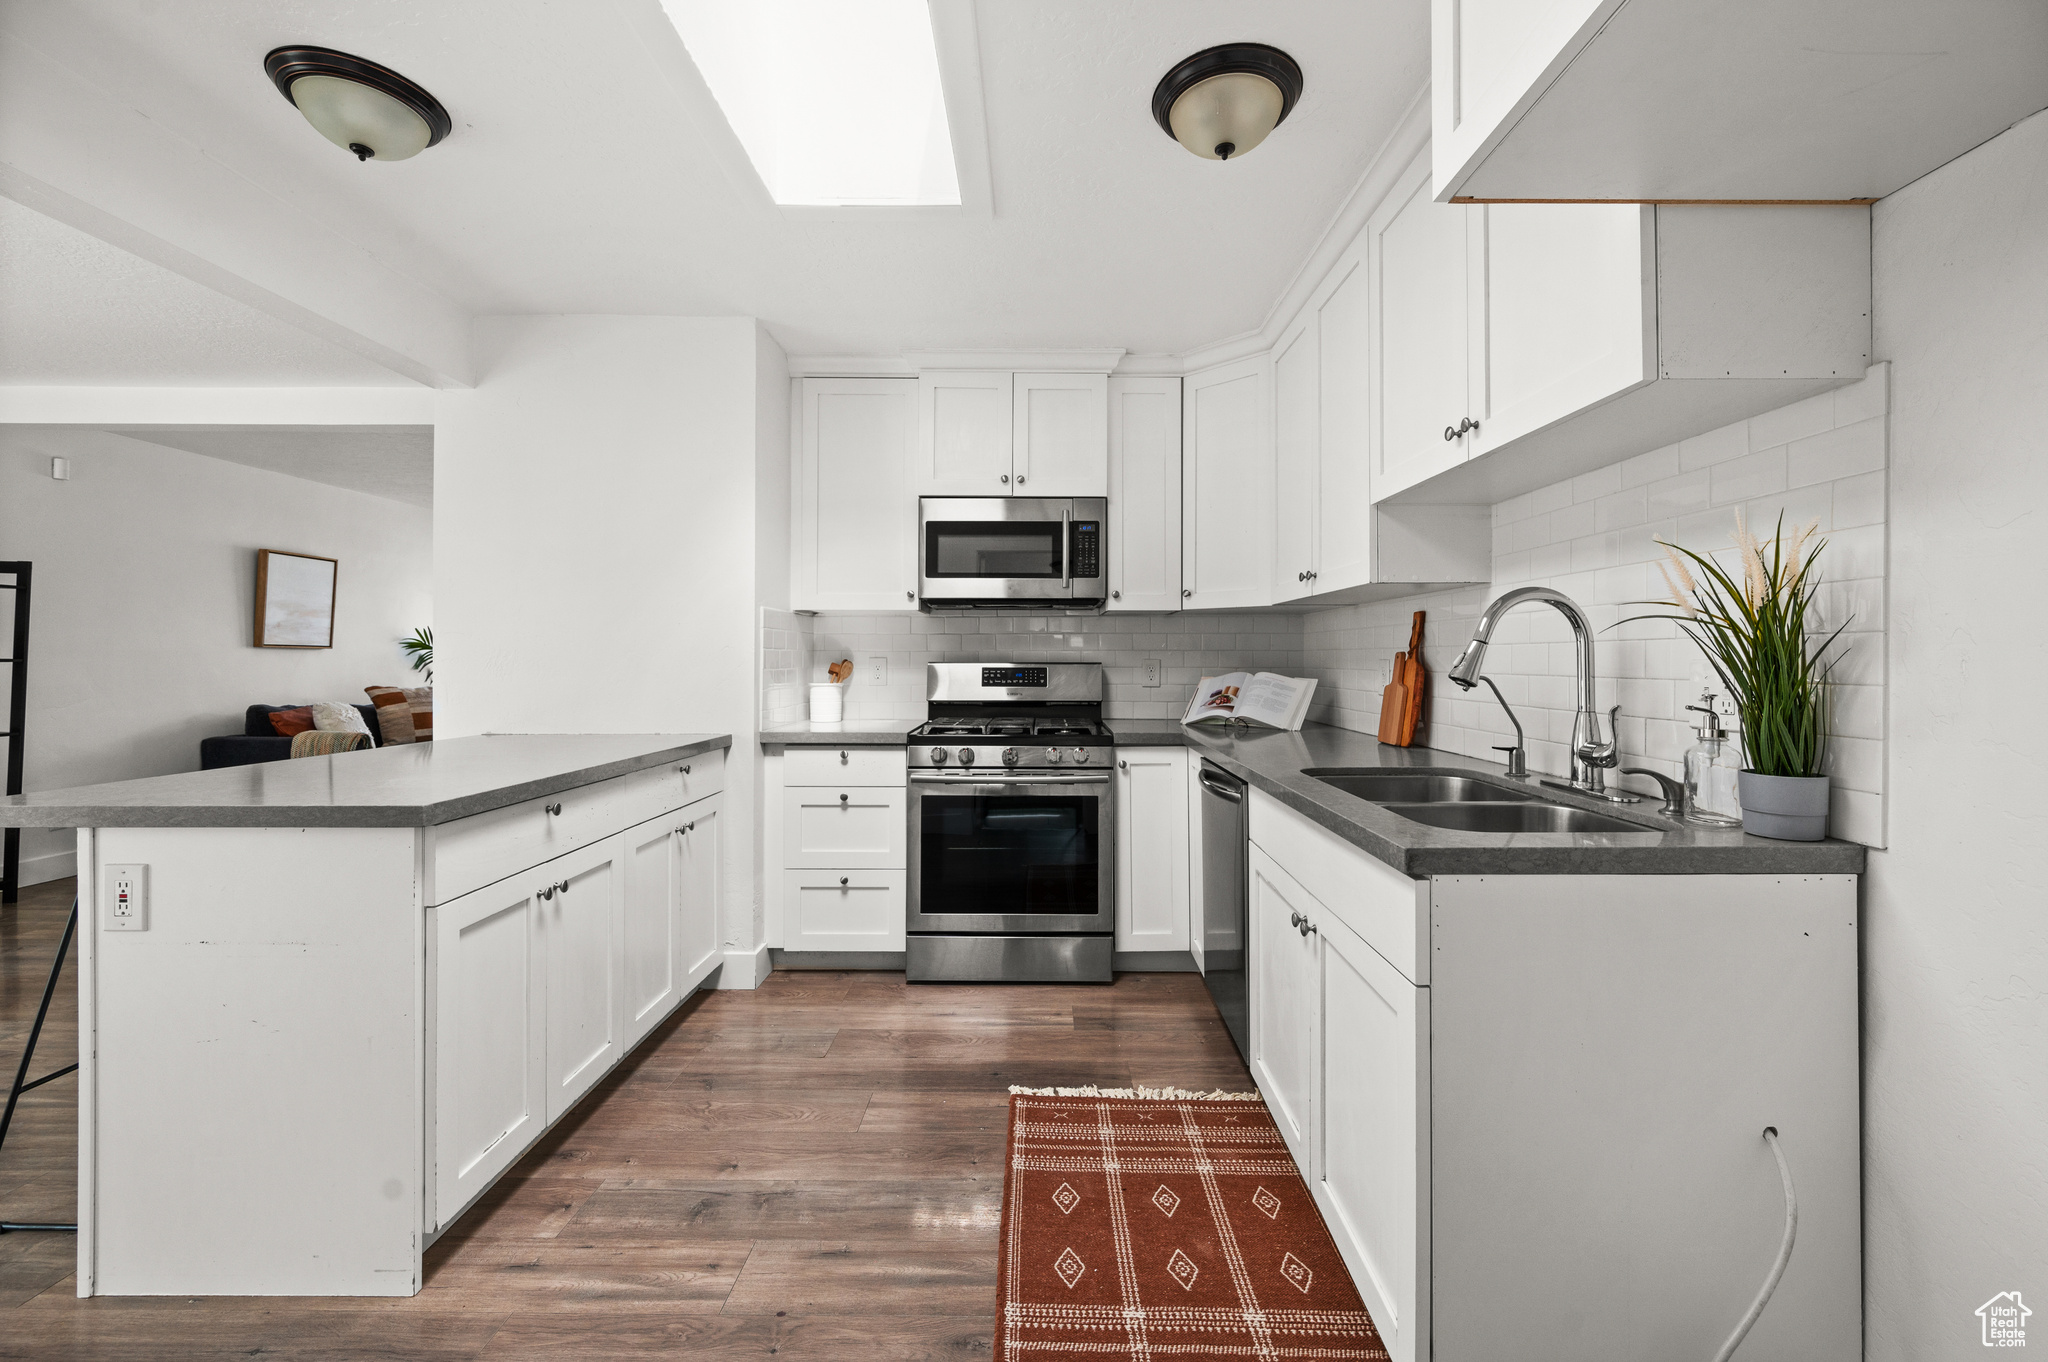 Kitchen with backsplash, appliances with stainless steel finishes, white cabinets, sink, and dark hardwood / wood-style flooring